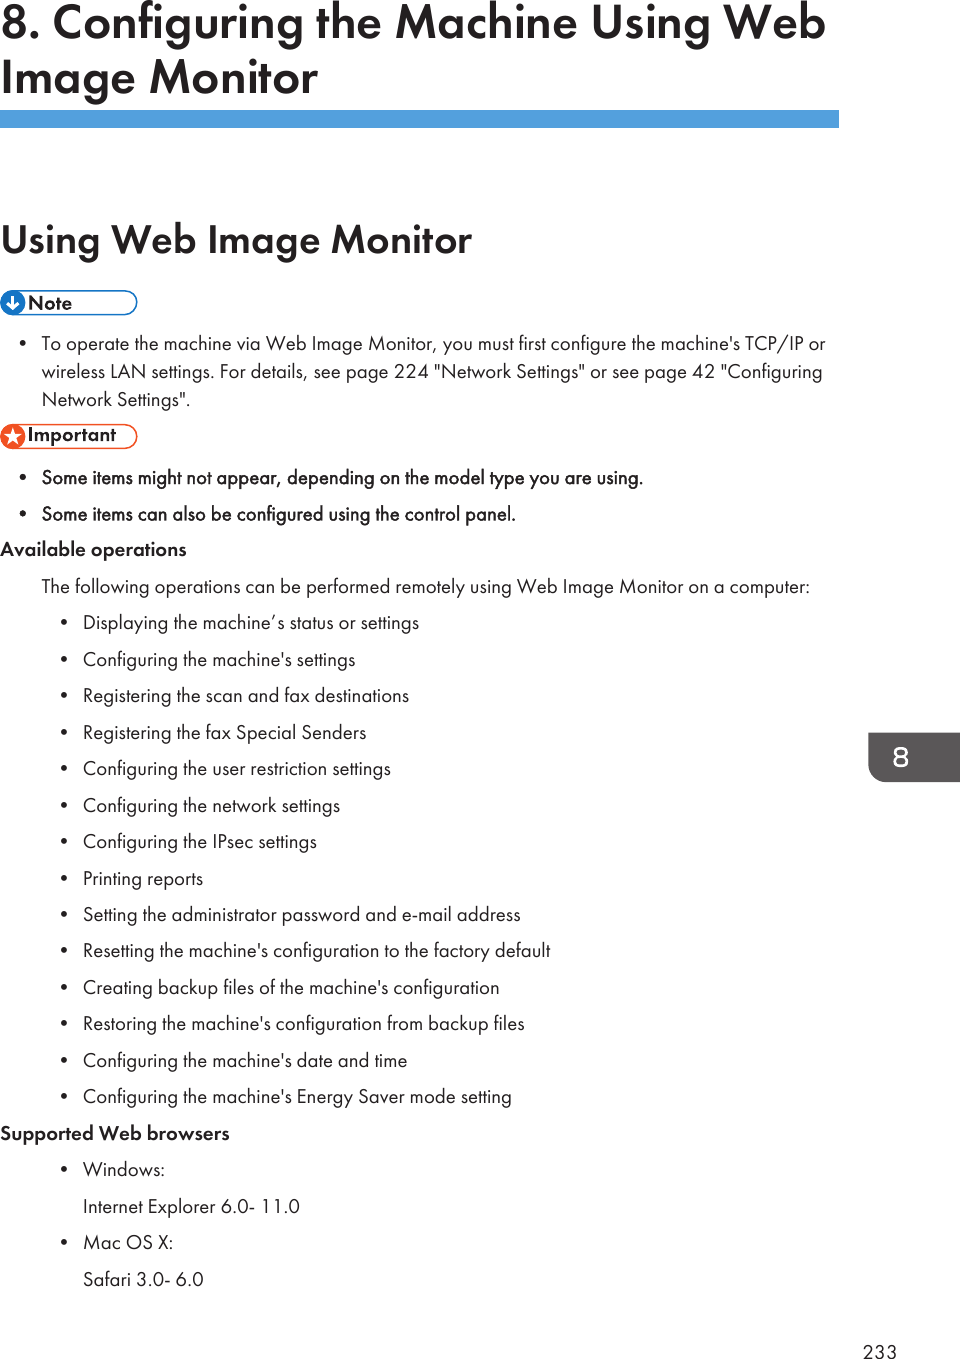 8. Configuring the Machine Using WebImage MonitorUsing Web Image Monitor• To operate the machine via Web Image Monitor, you must first configure the machine&apos;s TCP/IP orwireless LAN settings. For details, see page 224 &quot;Network Settings&quot; or see page 42 &quot;ConfiguringNetwork Settings&quot;.• Some items might not appear, depending on the model type you are using.• Some items can also be configured using the control panel.Available operationsThe following operations can be performed remotely using Web Image Monitor on a computer:• Displaying the machine’s status or settings• Configuring the machine&apos;s settings• Registering the scan and fax destinations• Registering the fax Special Senders• Configuring the user restriction settings• Configuring the network settings• Configuring the IPsec settings• Printing reports• Setting the administrator password and e-mail address• Resetting the machine&apos;s configuration to the factory default• Creating backup files of the machine&apos;s configuration• Restoring the machine&apos;s configuration from backup files• Configuring the machine&apos;s date and time• Configuring the machine&apos;s Energy Saver mode settingSupported Web browsers• Windows:Internet Explorer 6.0- 11.0• Mac OS X:Safari 3.0- 6.0233